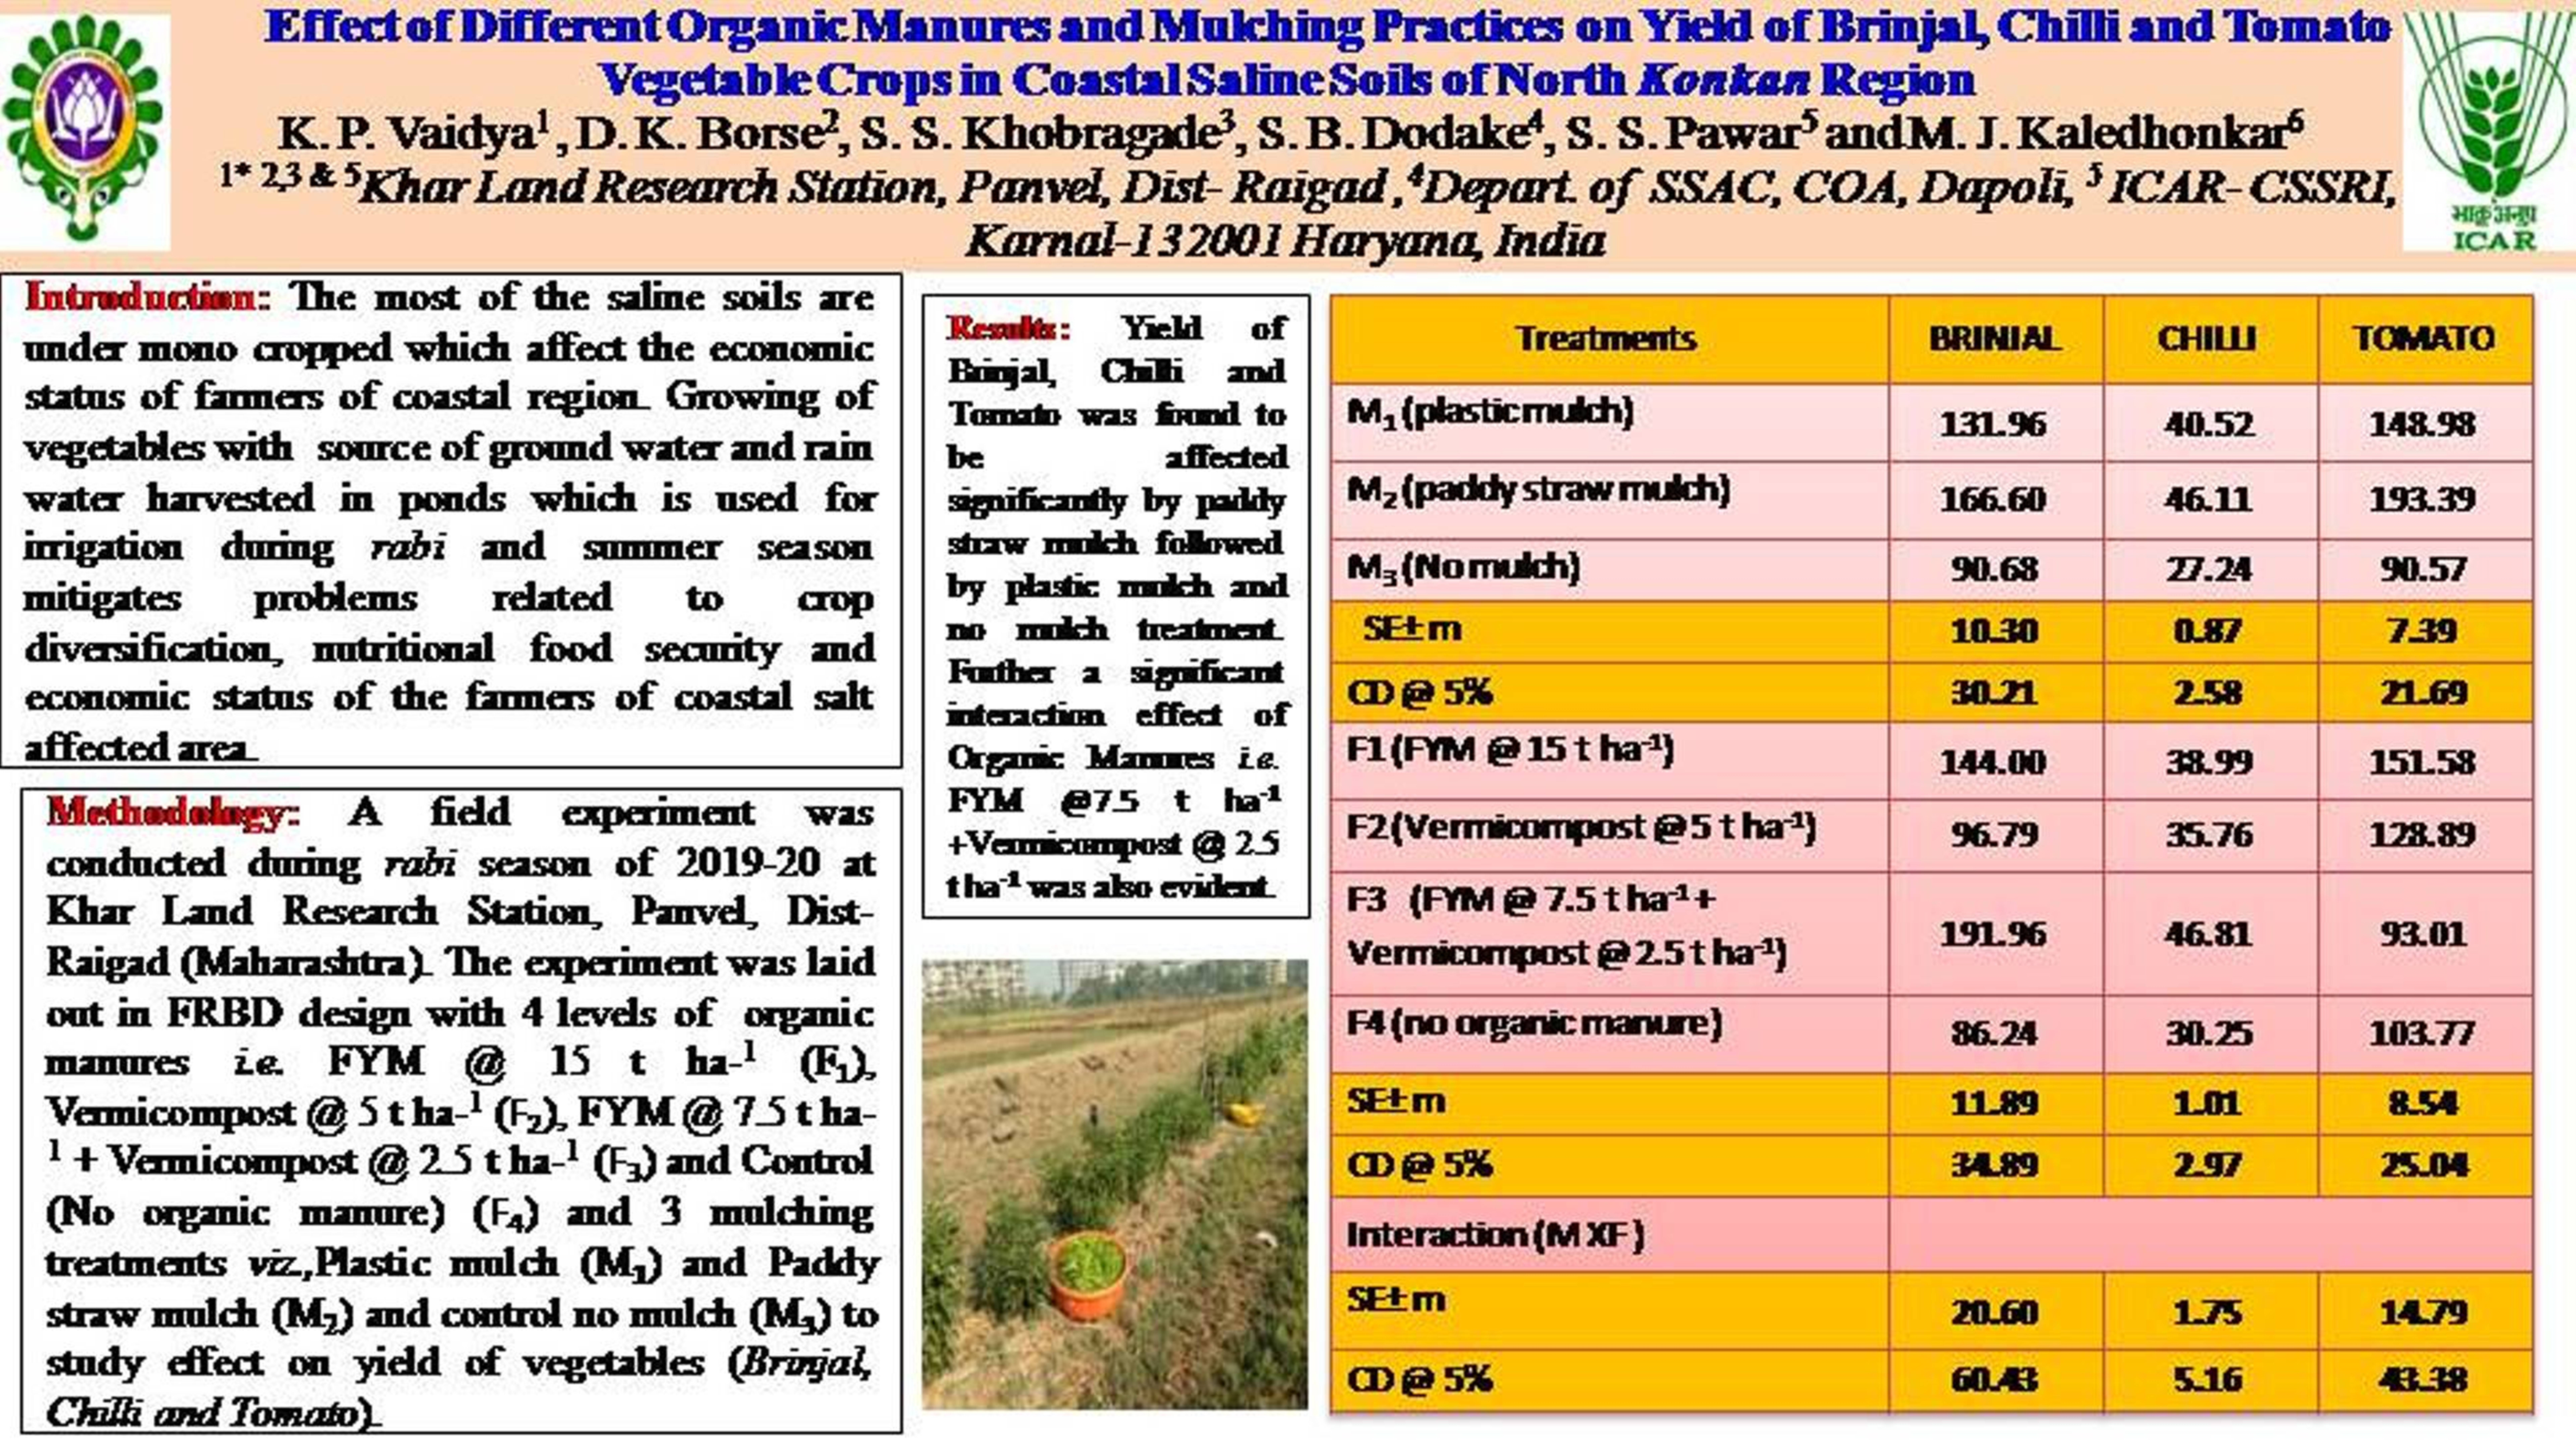 Effect of different organic manures and mulching practices on yield of Brinjal, Chilli and Tomato vegetable crops in coastal saline soils of North Konkan region